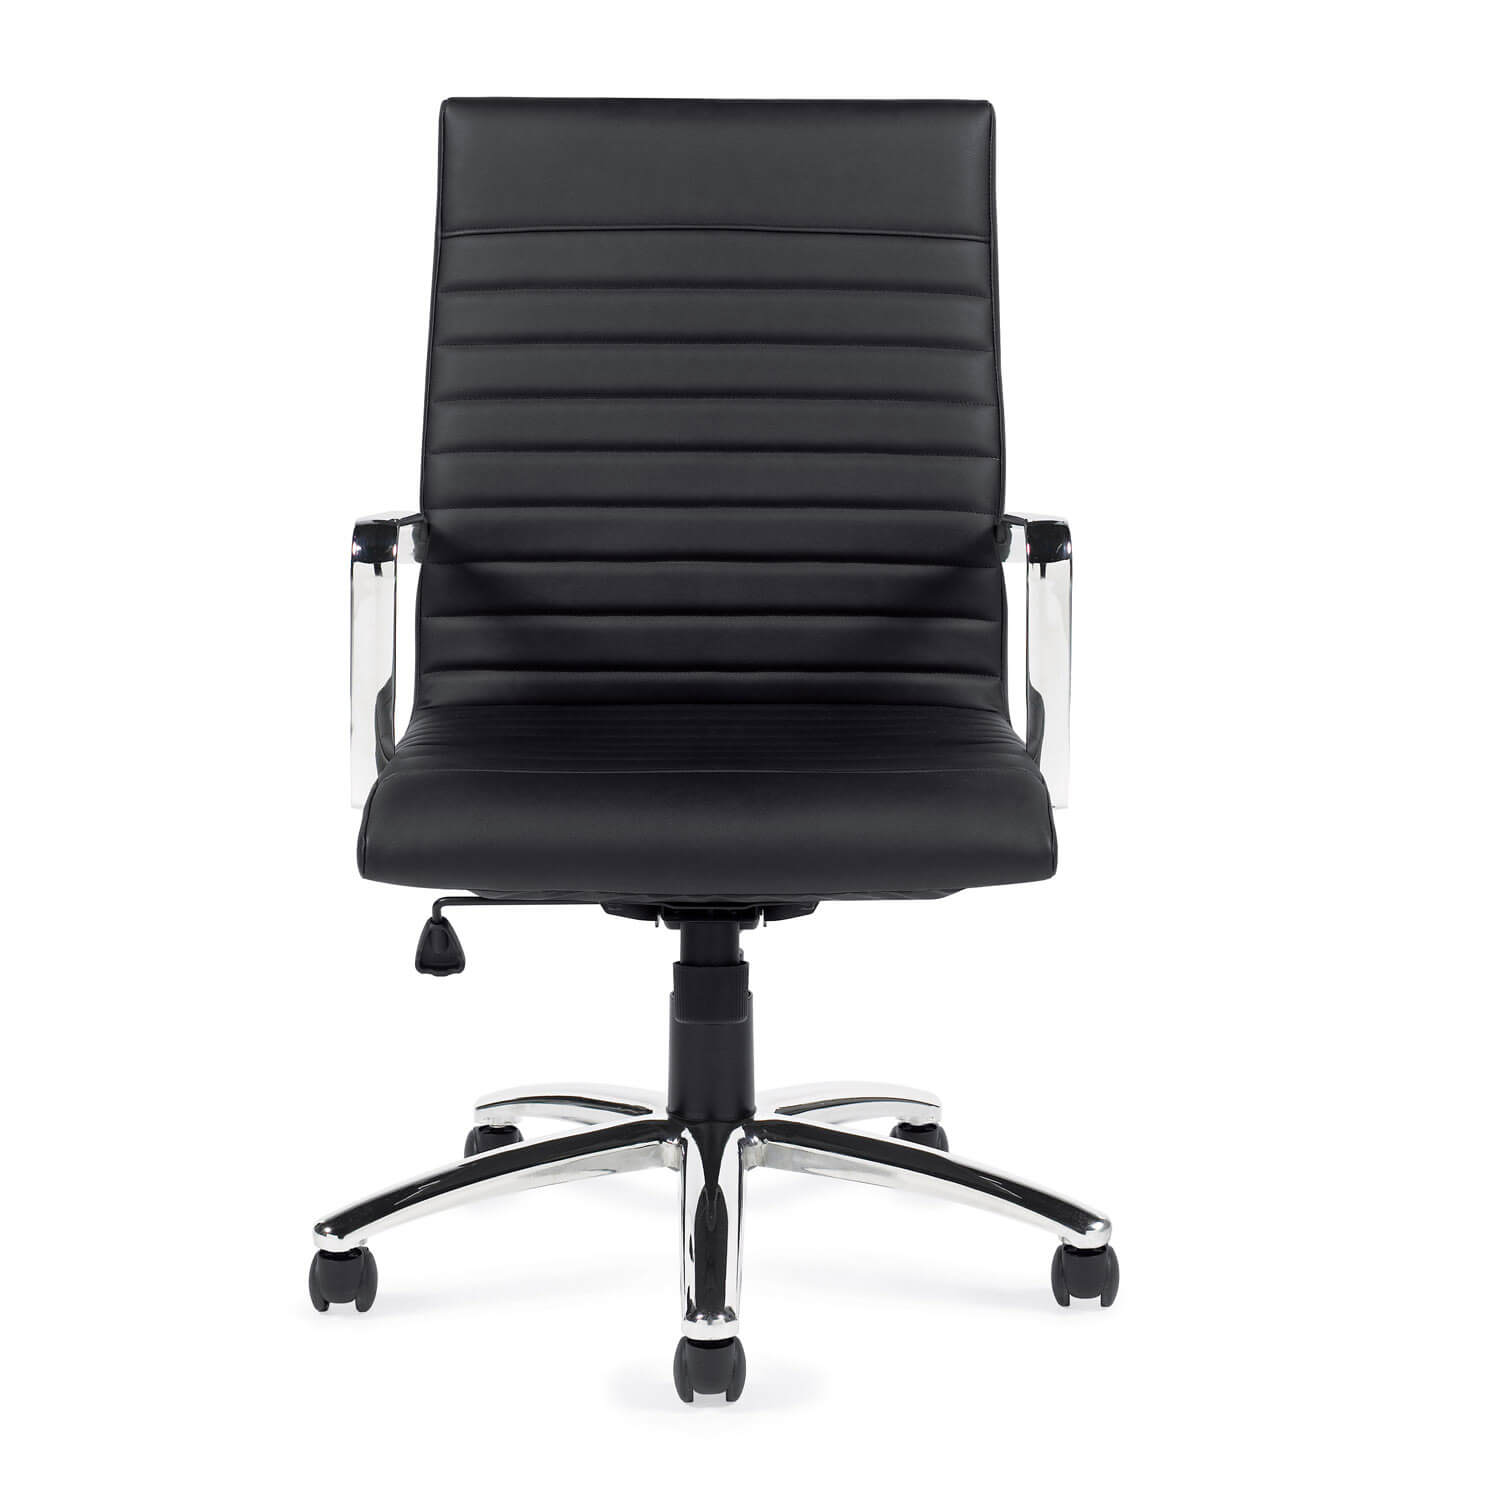 Conference style seating CUB 11730B GTO